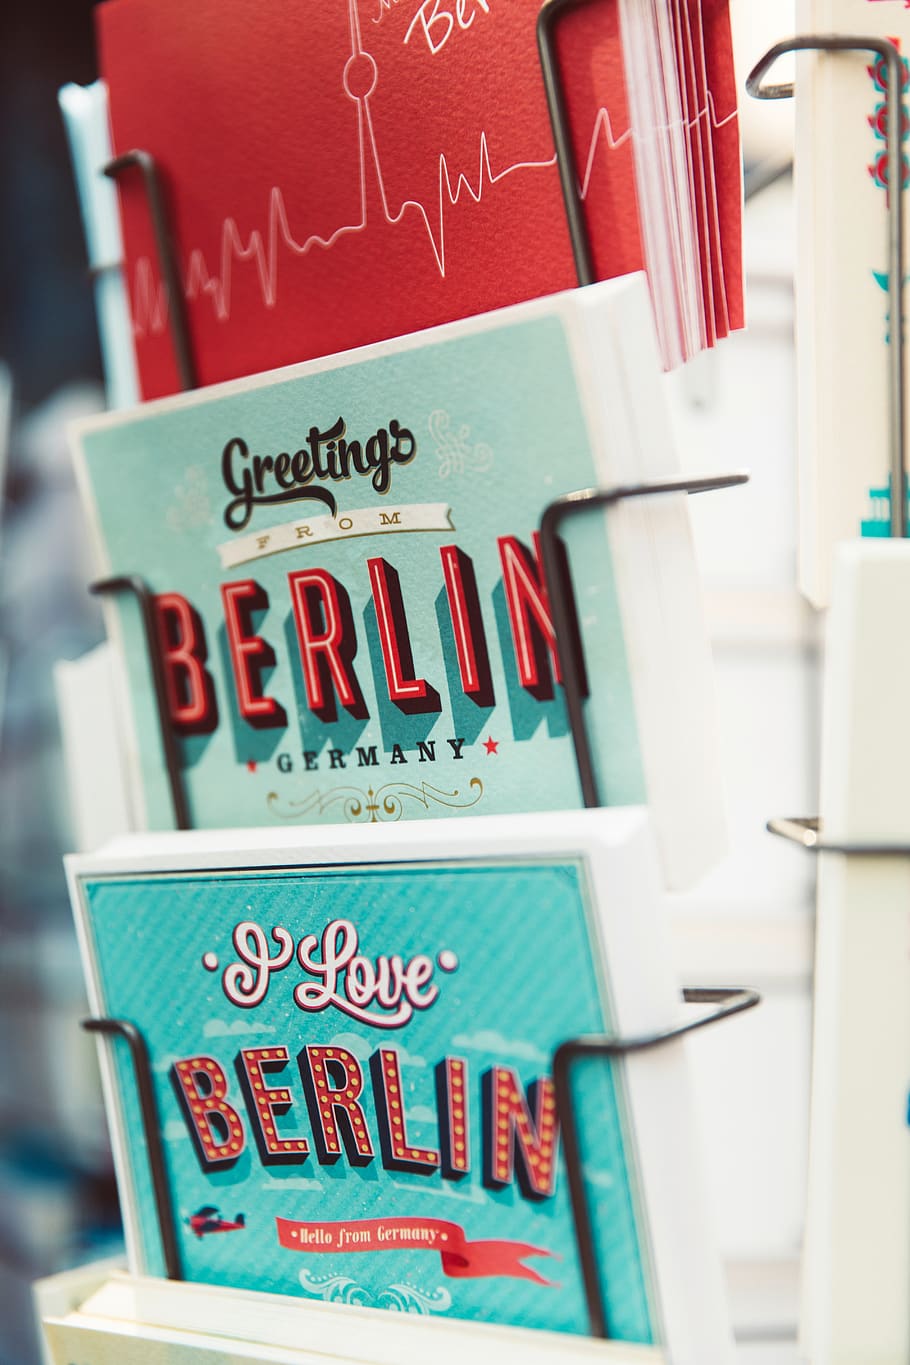 book, germany, bookstore, blue, rack, text, communication, western script, close-up, red